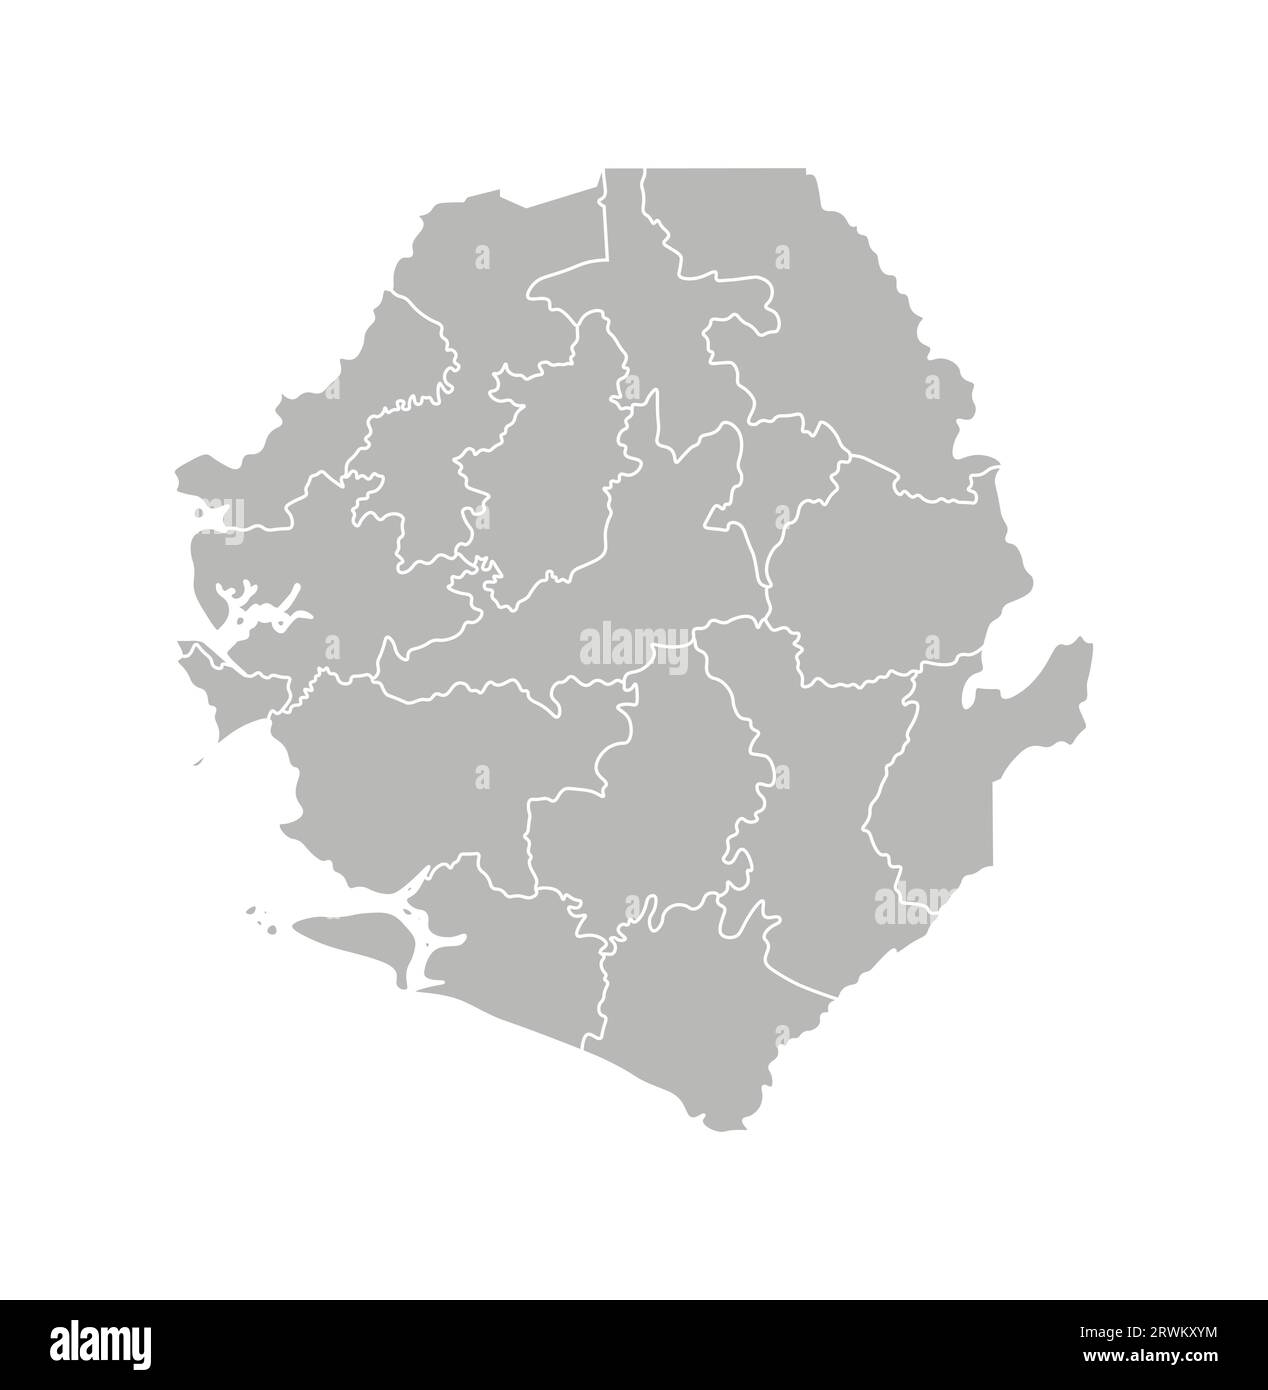 Vector isolated illustration of simplified administrative map of Sierra Leone. Borders of the districts (regions). Grey silhouettes. White outline. Stock Vector